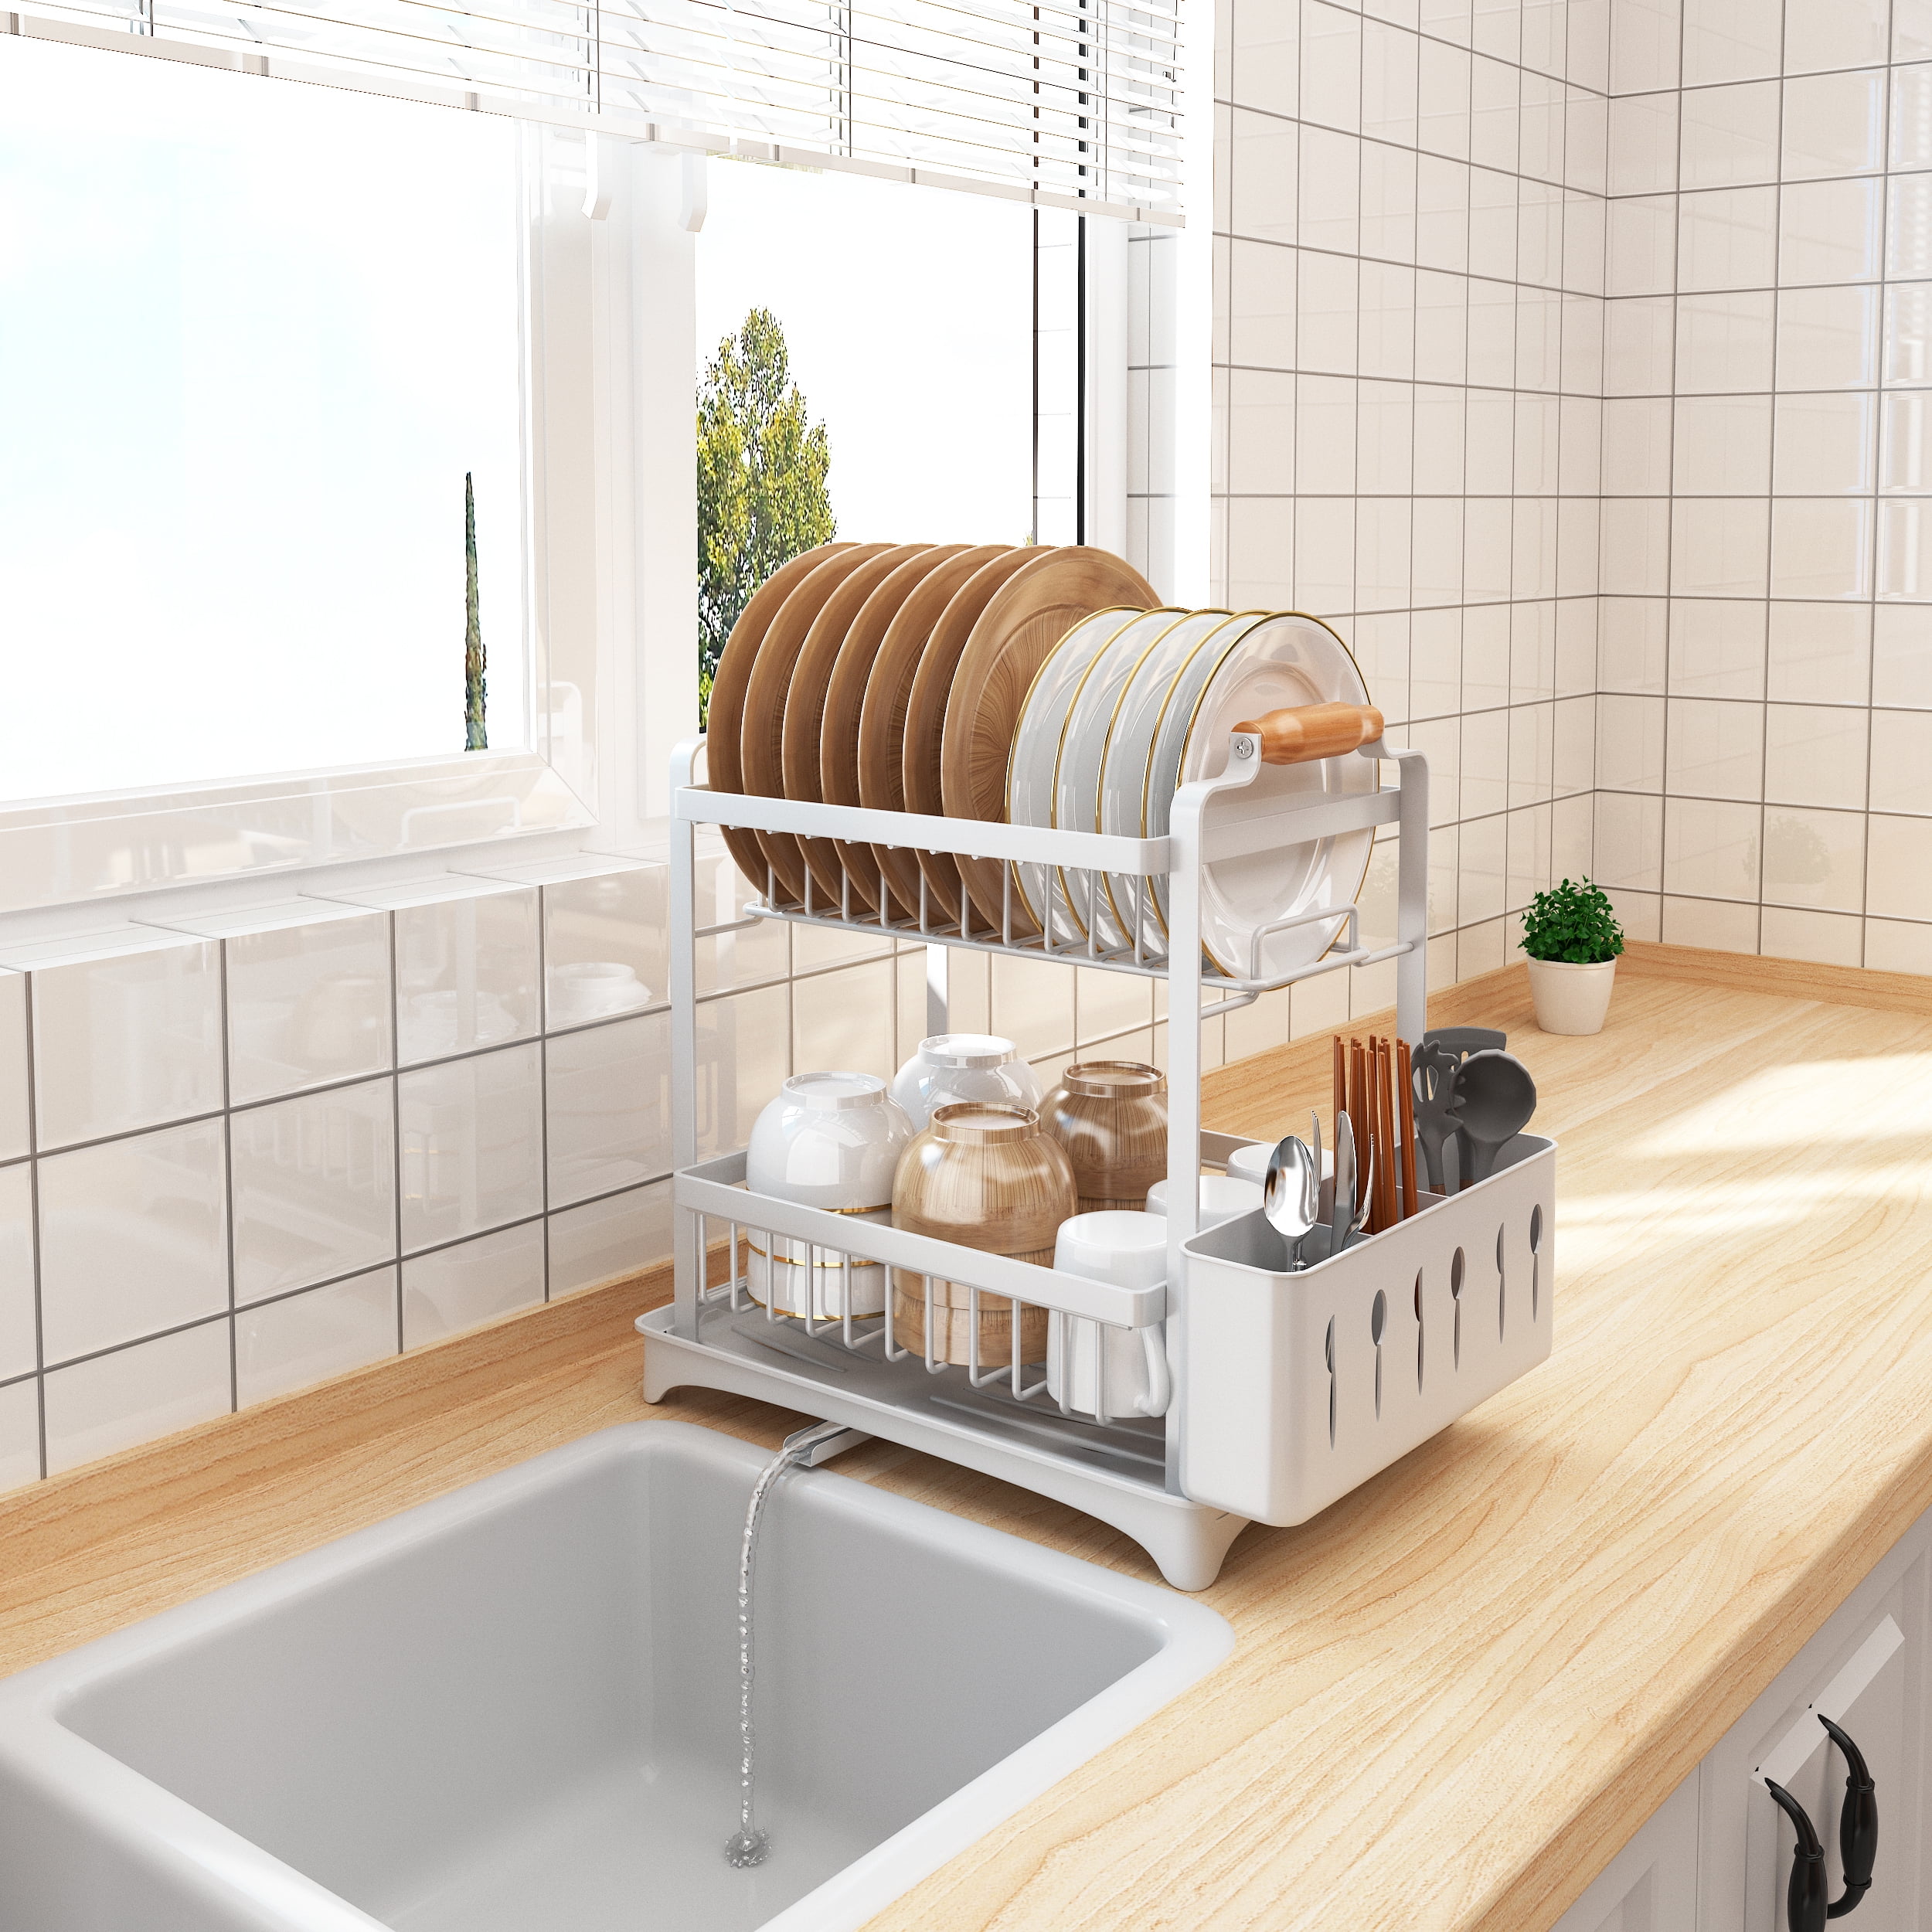 Dish Drying Rack, Large Dish Drainer 2 Tier for Kitchen Counter Sink  Escurridor de Trastes Platos para Fregadero Cocina Dish Drain Strainers  with